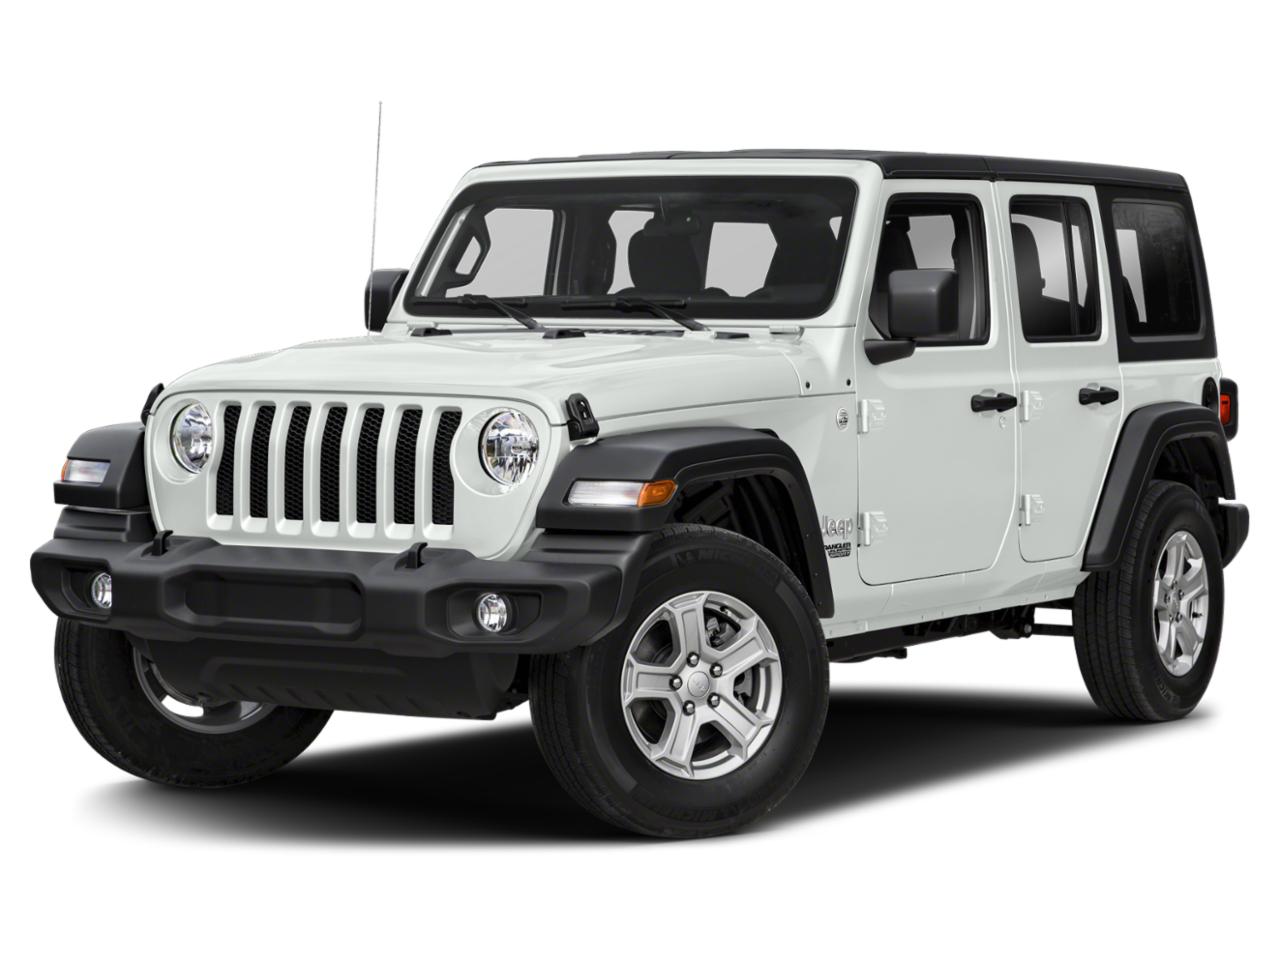 2020 Jeep Wrangler Unlimited Vehicle Photo in Saint Charles, IL 60174